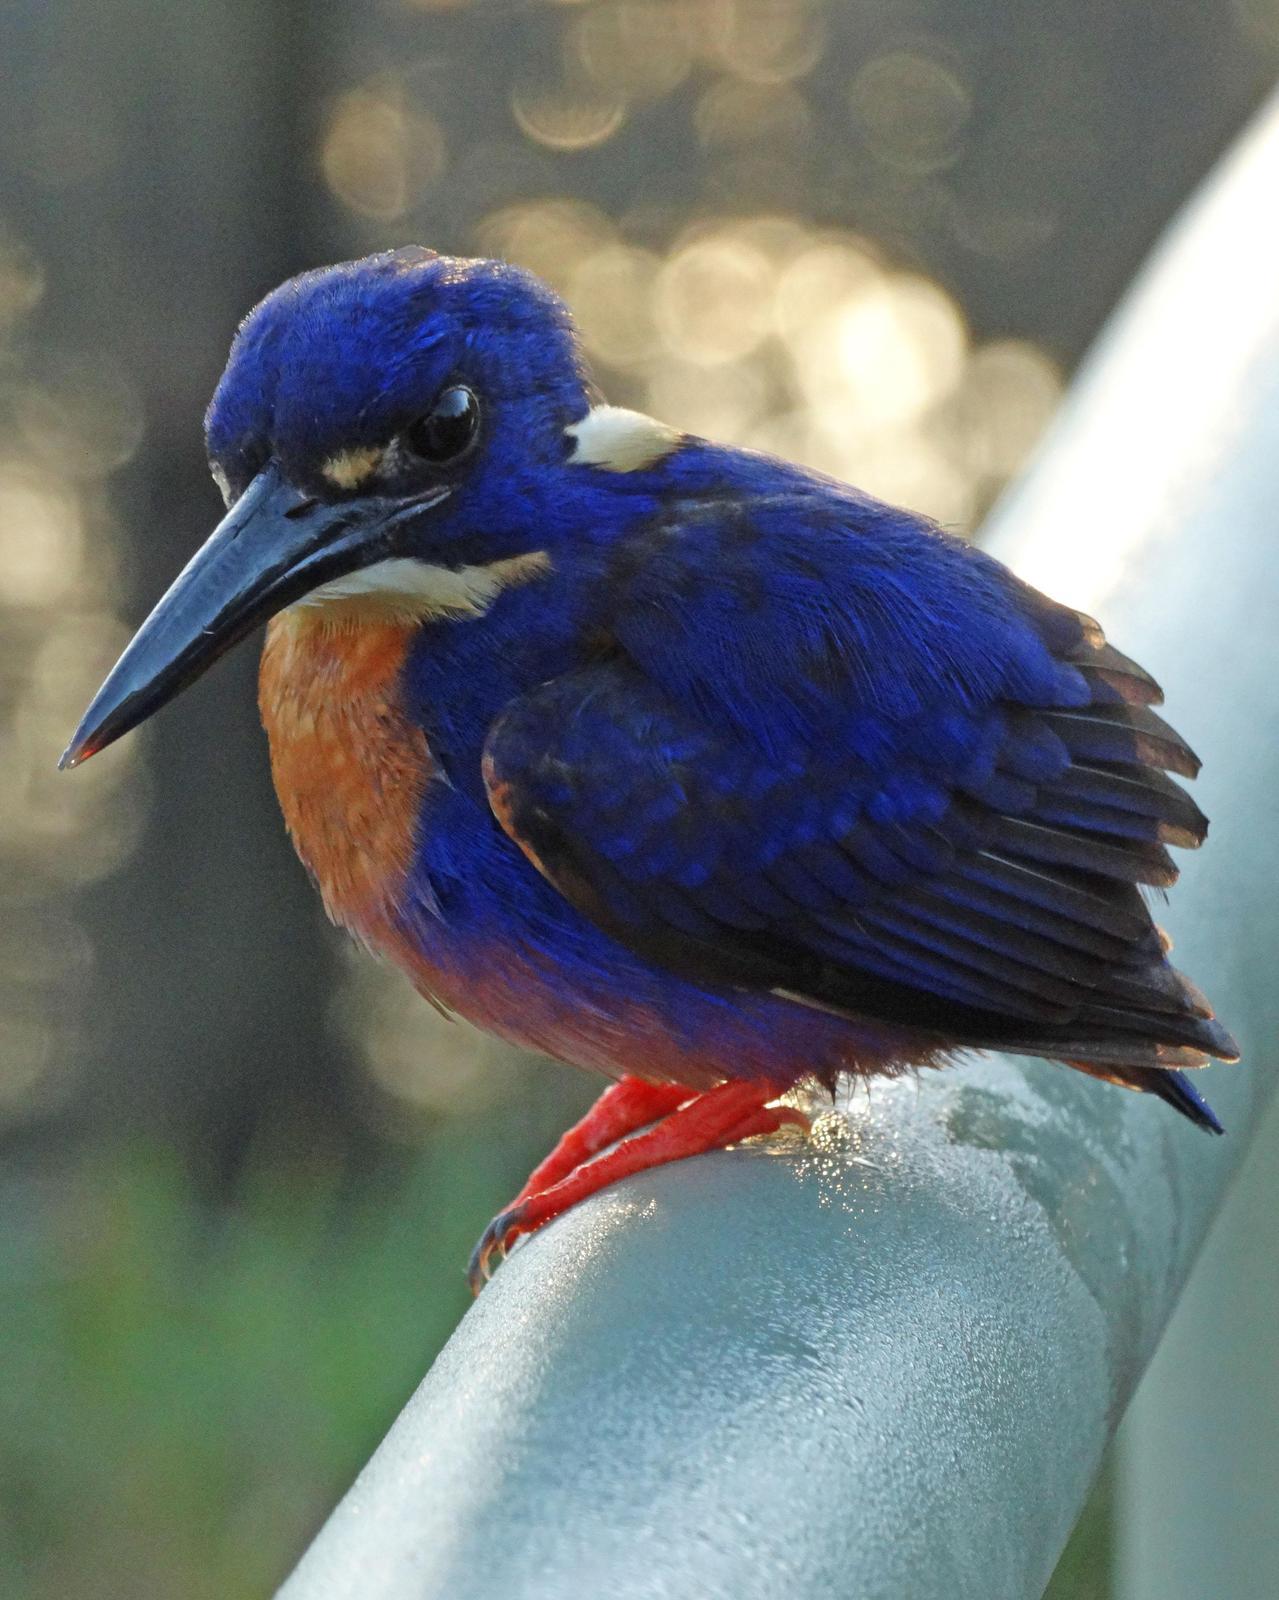 Azure Kingfisher Photo by Emily Percival